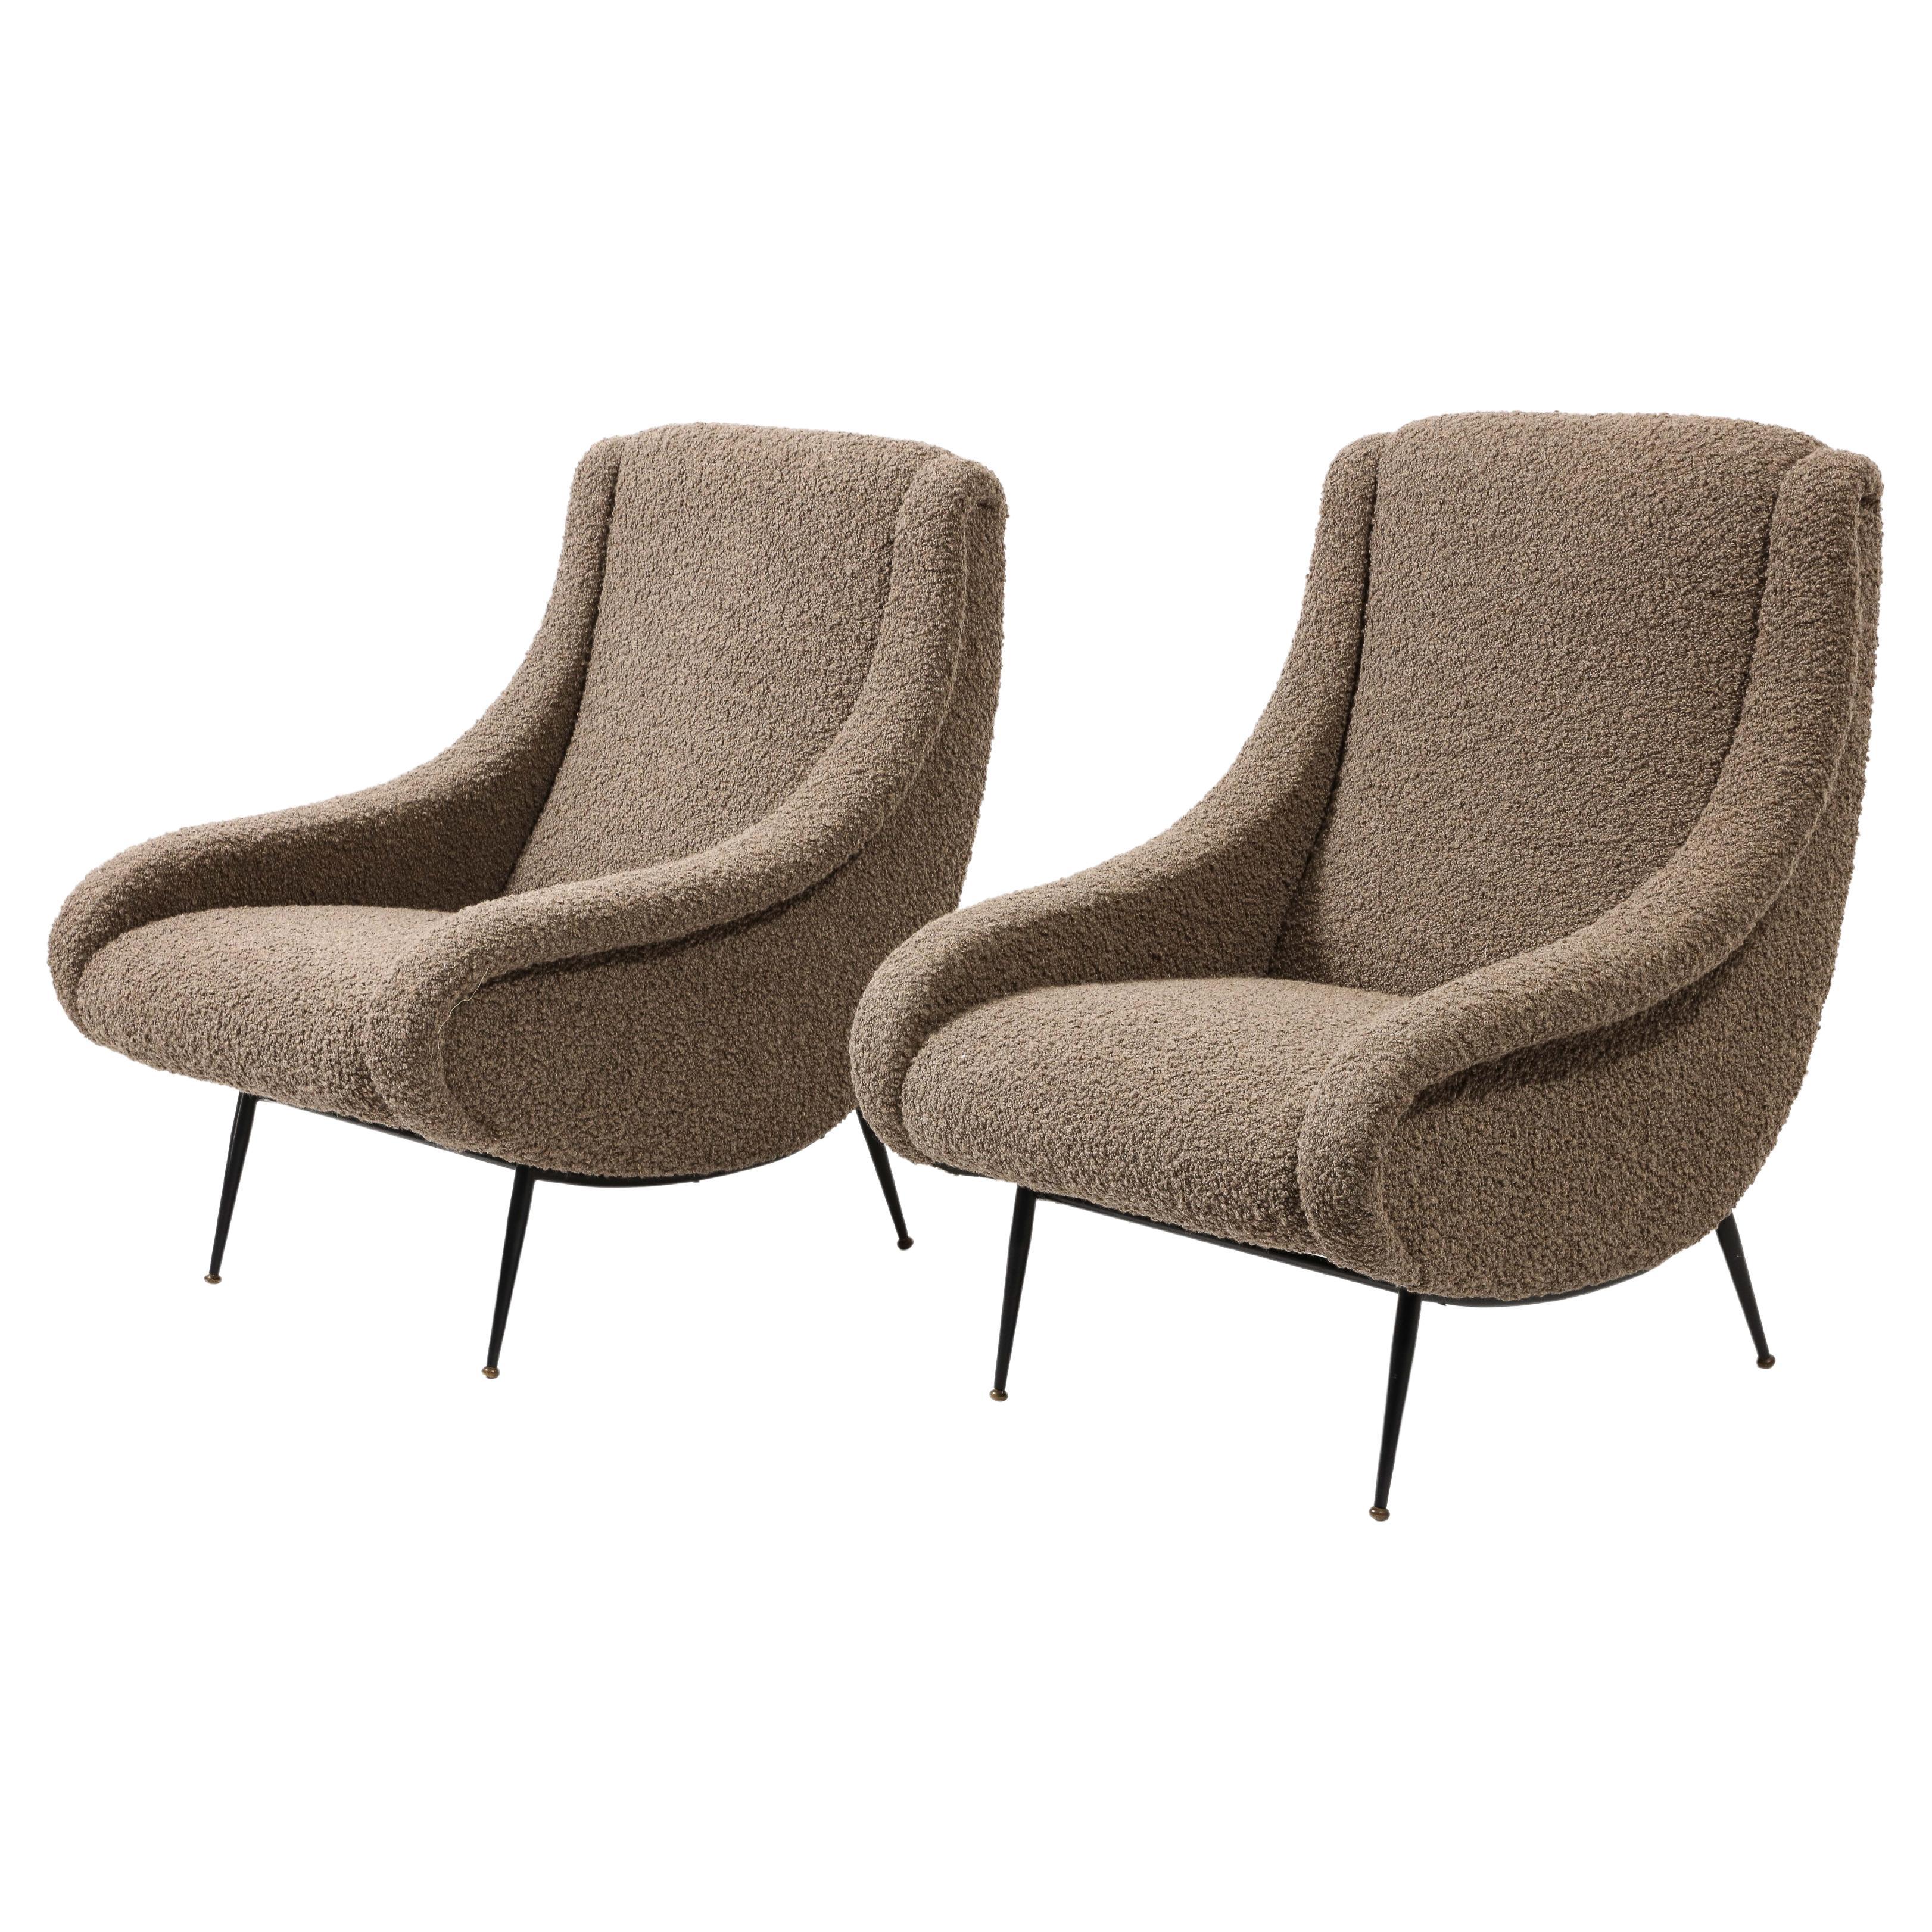 Pair of Zanuso Style Armchairs in Boucle, Italy 1960's For Sale